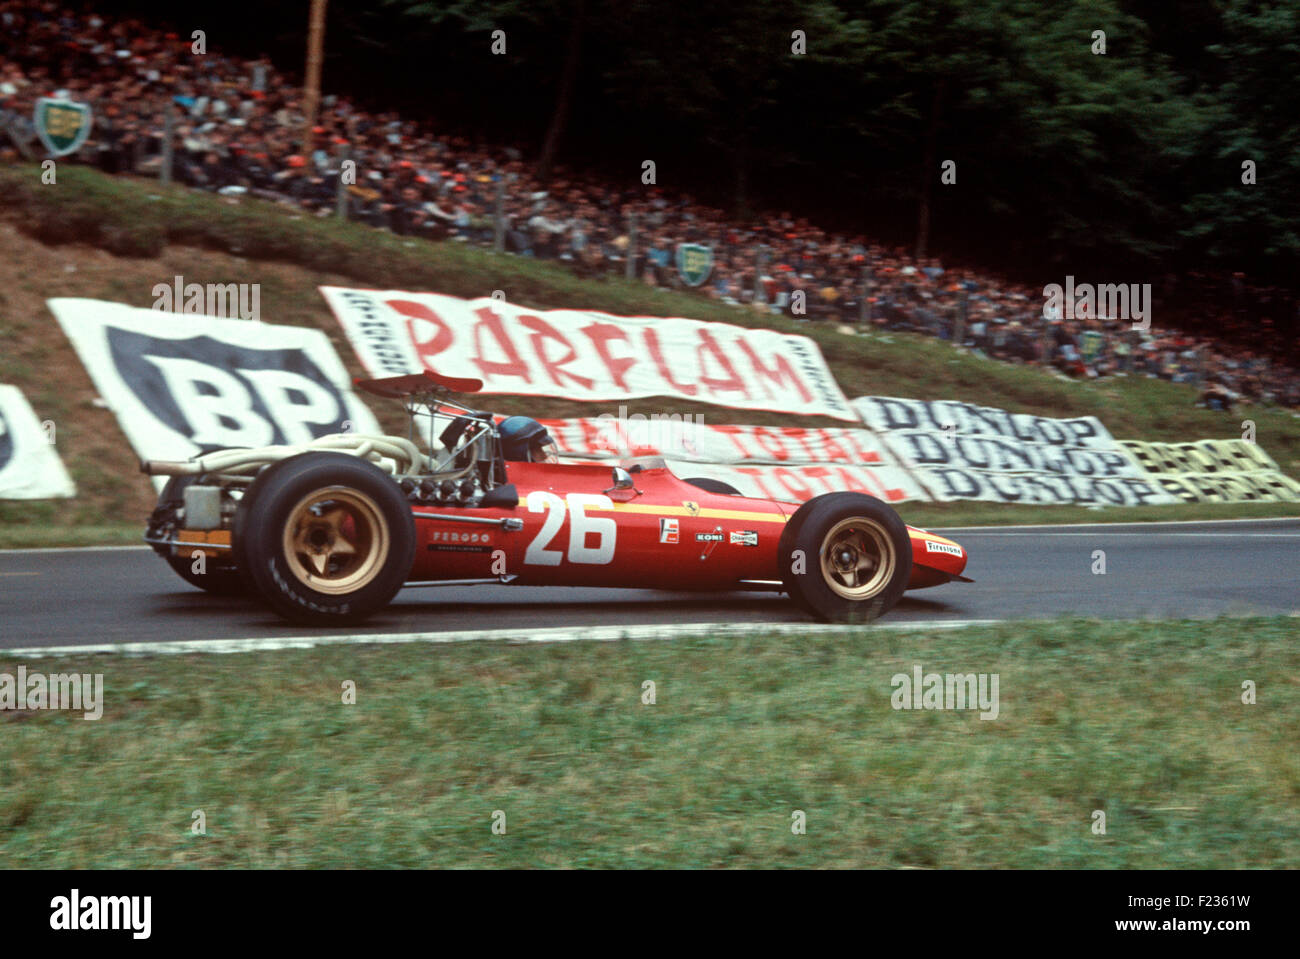 26 Jackie Ickx in his Ferrari 312 V12 entering Nouveau Monde Hairpin at Rouen, the eventual winner of the French GP 7 July 1968 Stock Photo